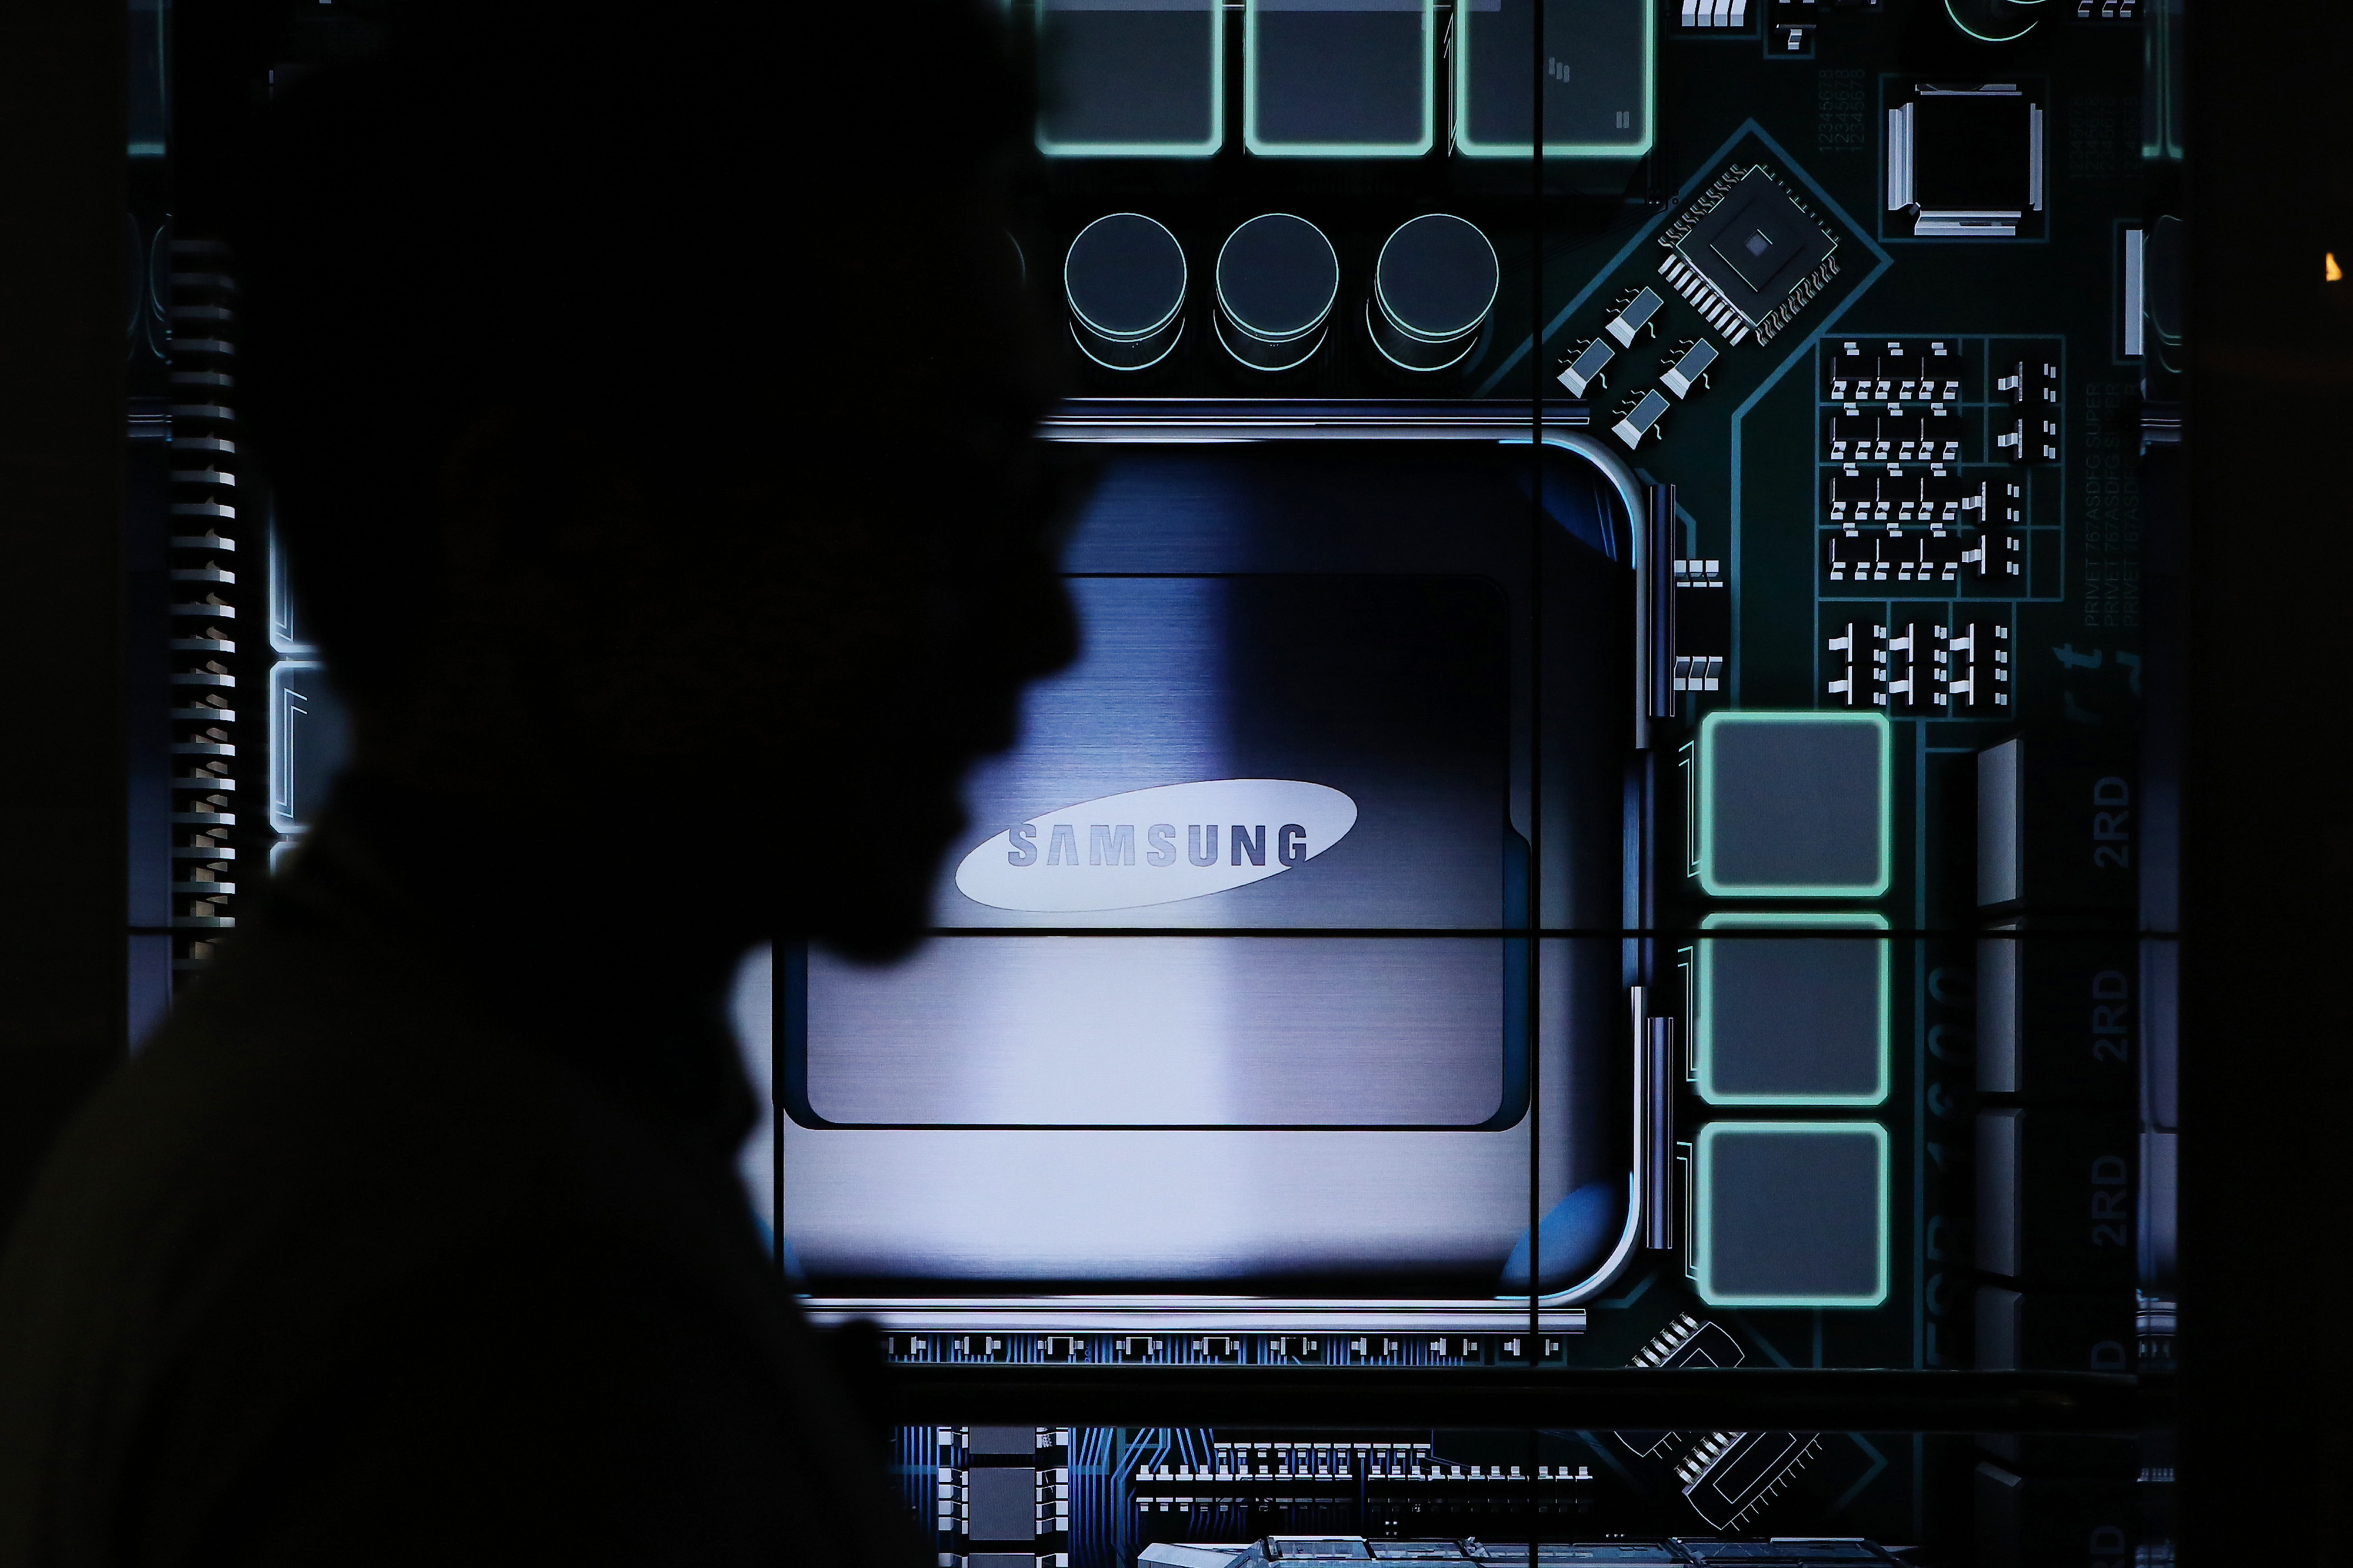 A visitor walks past the Samsung Electronics Co. logo displayed at the Semiconductor Rider experience at the company's d'light showroom in Seoul, South Korea, on Tuesday, Jan. 27, 2015. (SeongJoon Cho—Bloomberg via Getty Images)